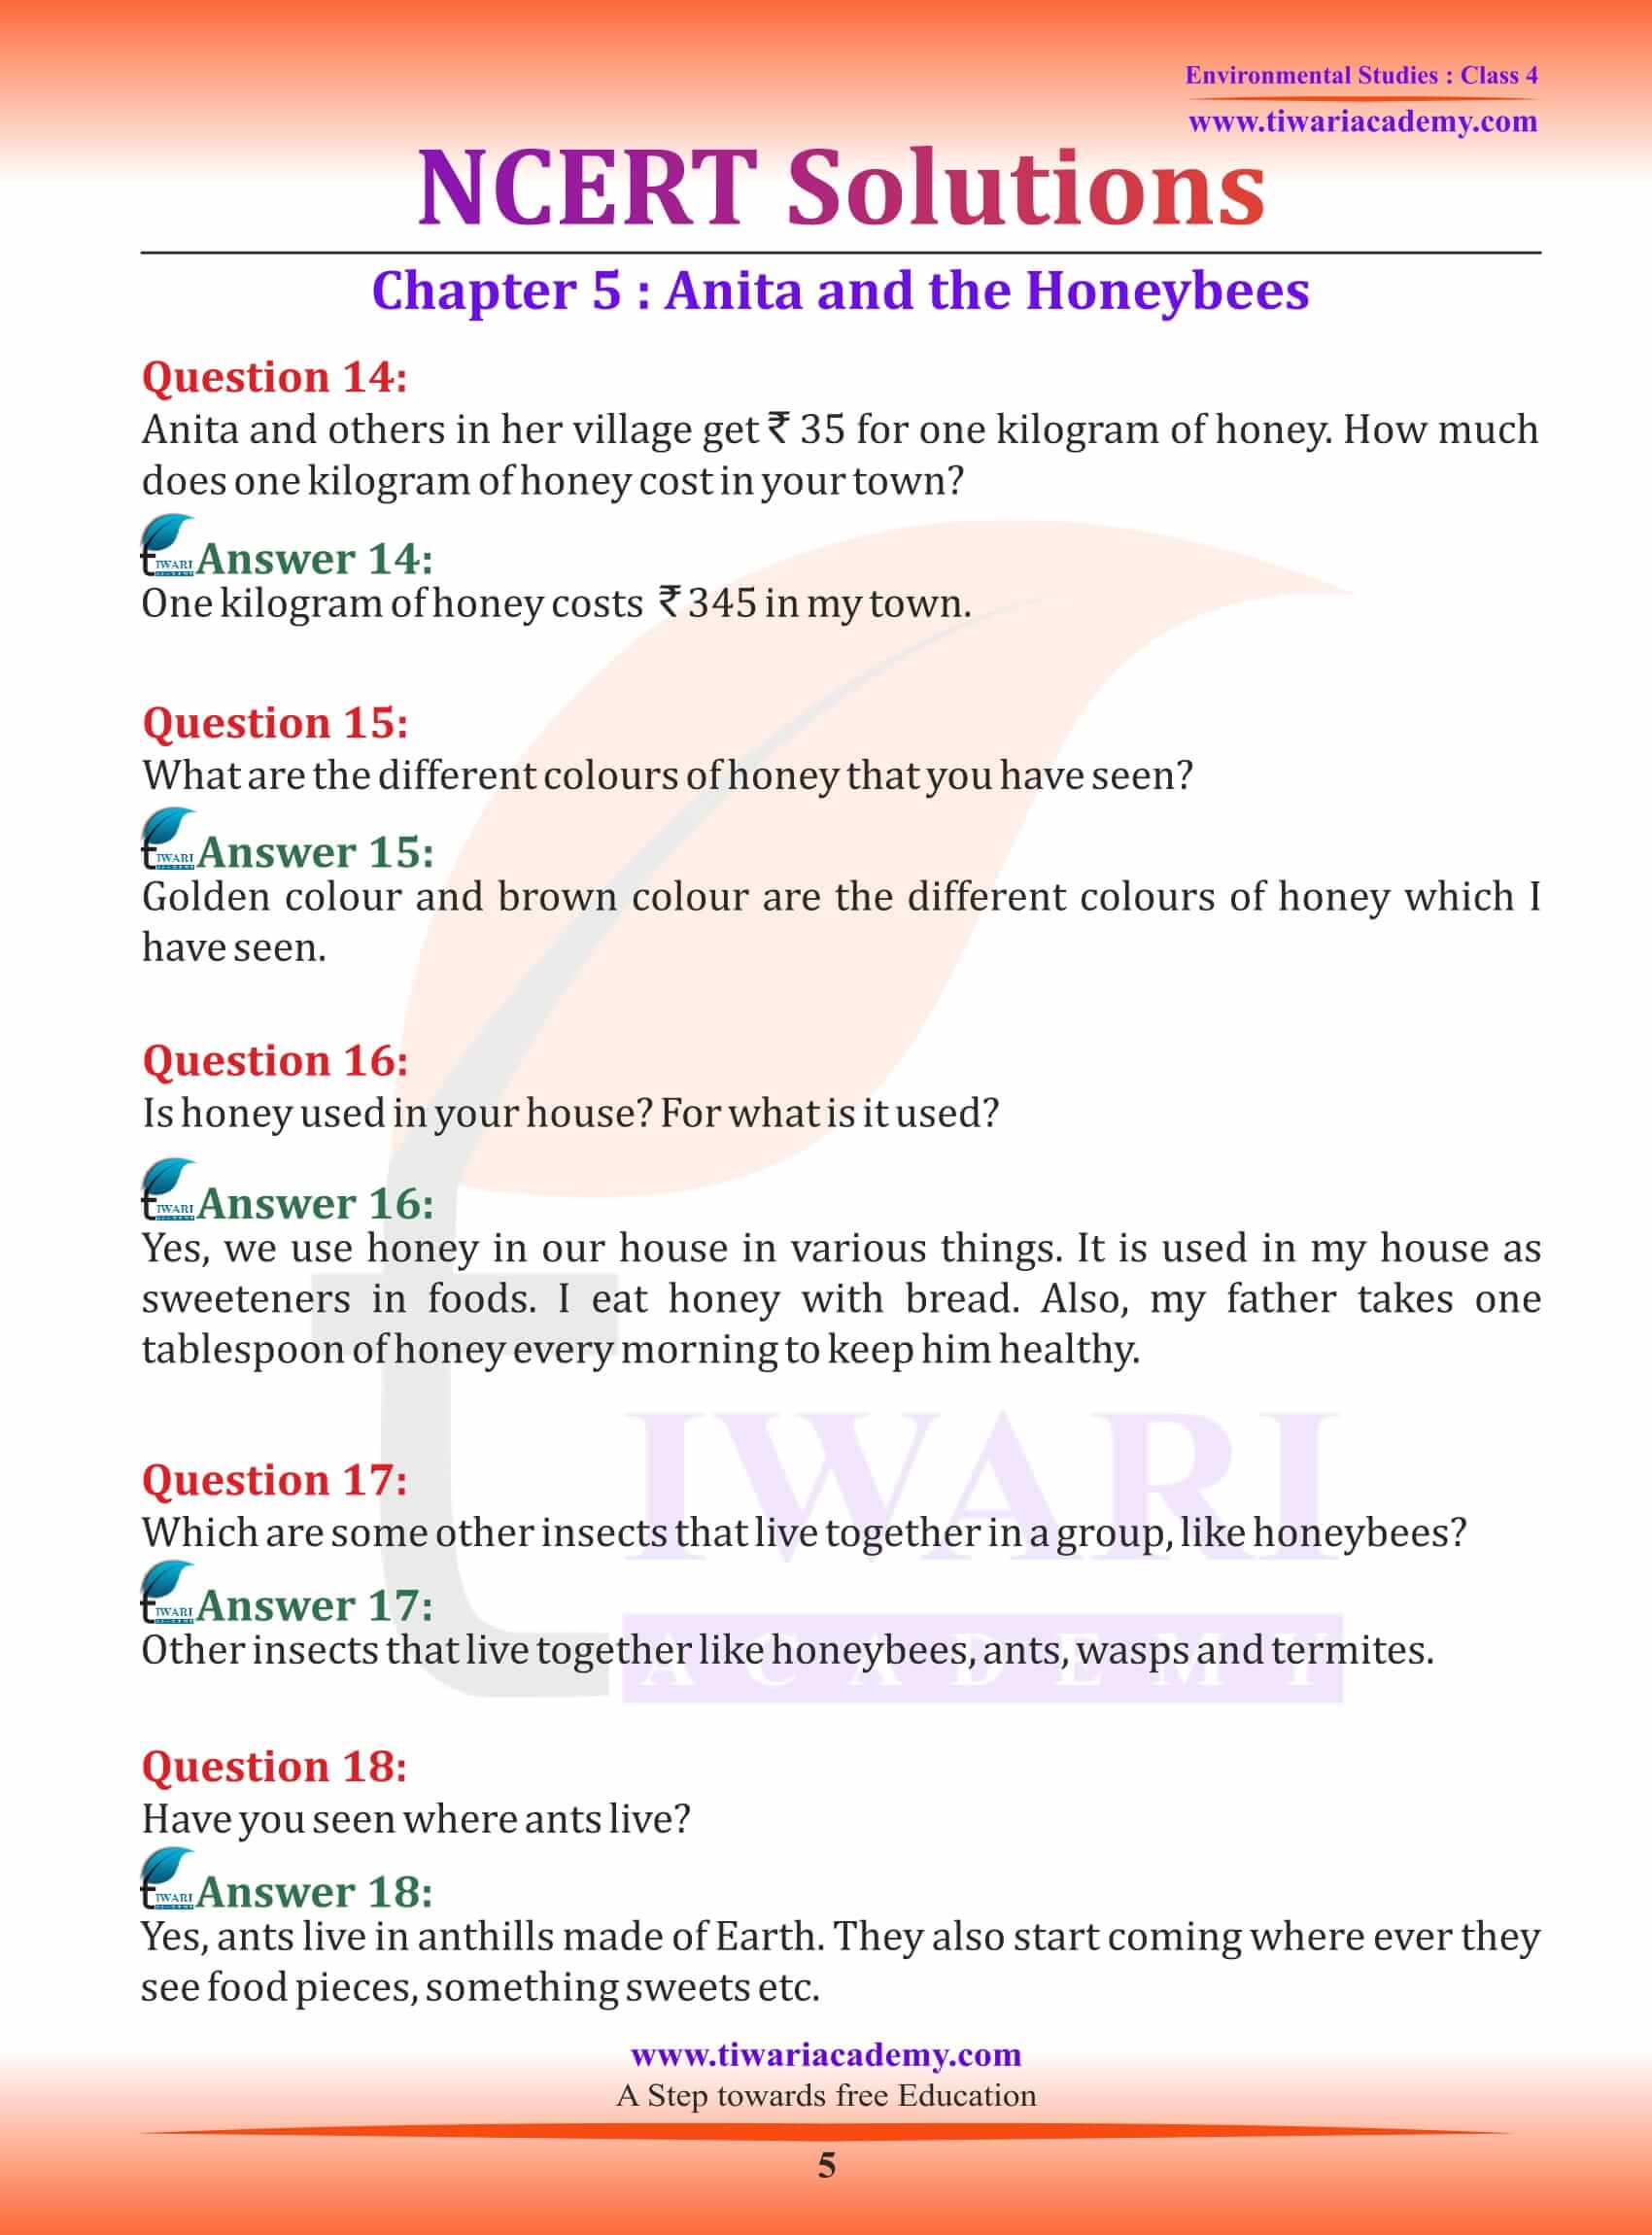 NCERT Solutions for Class 4 EVS Chapter 5 free